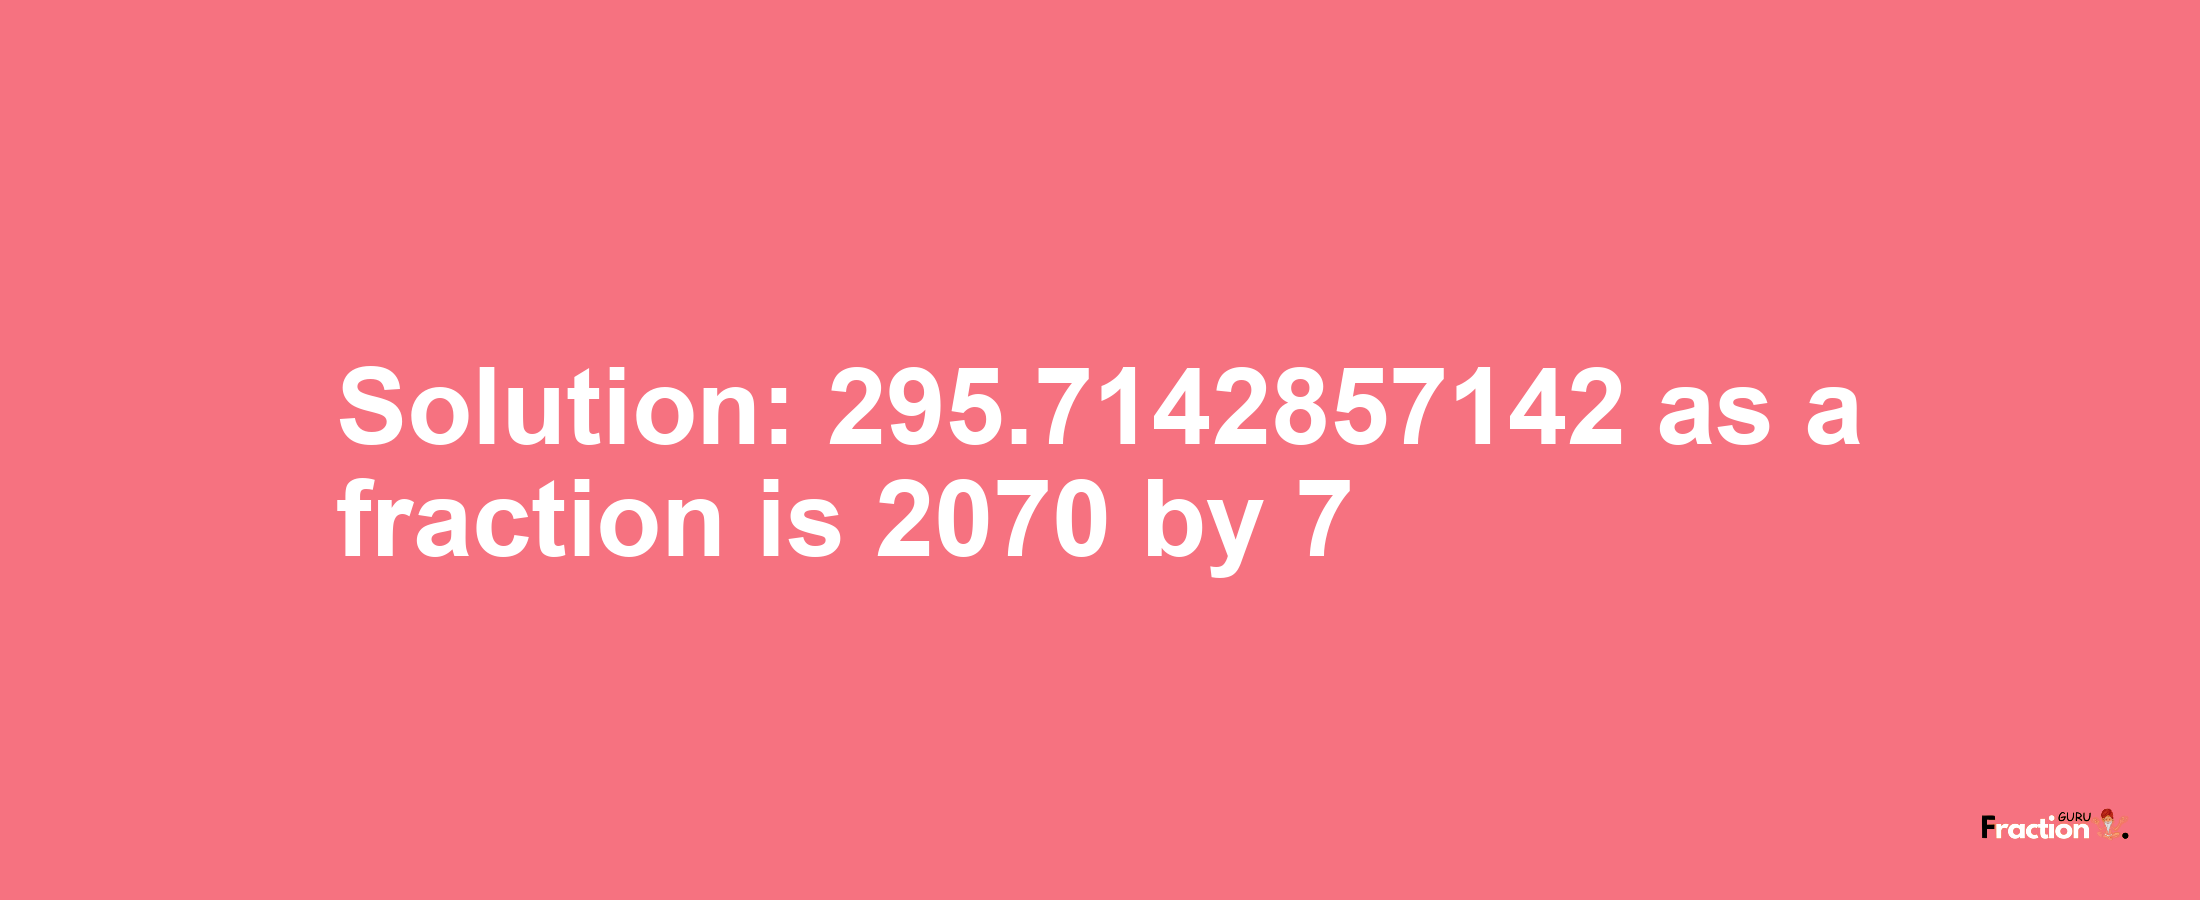 Solution:295.7142857142 as a fraction is 2070/7